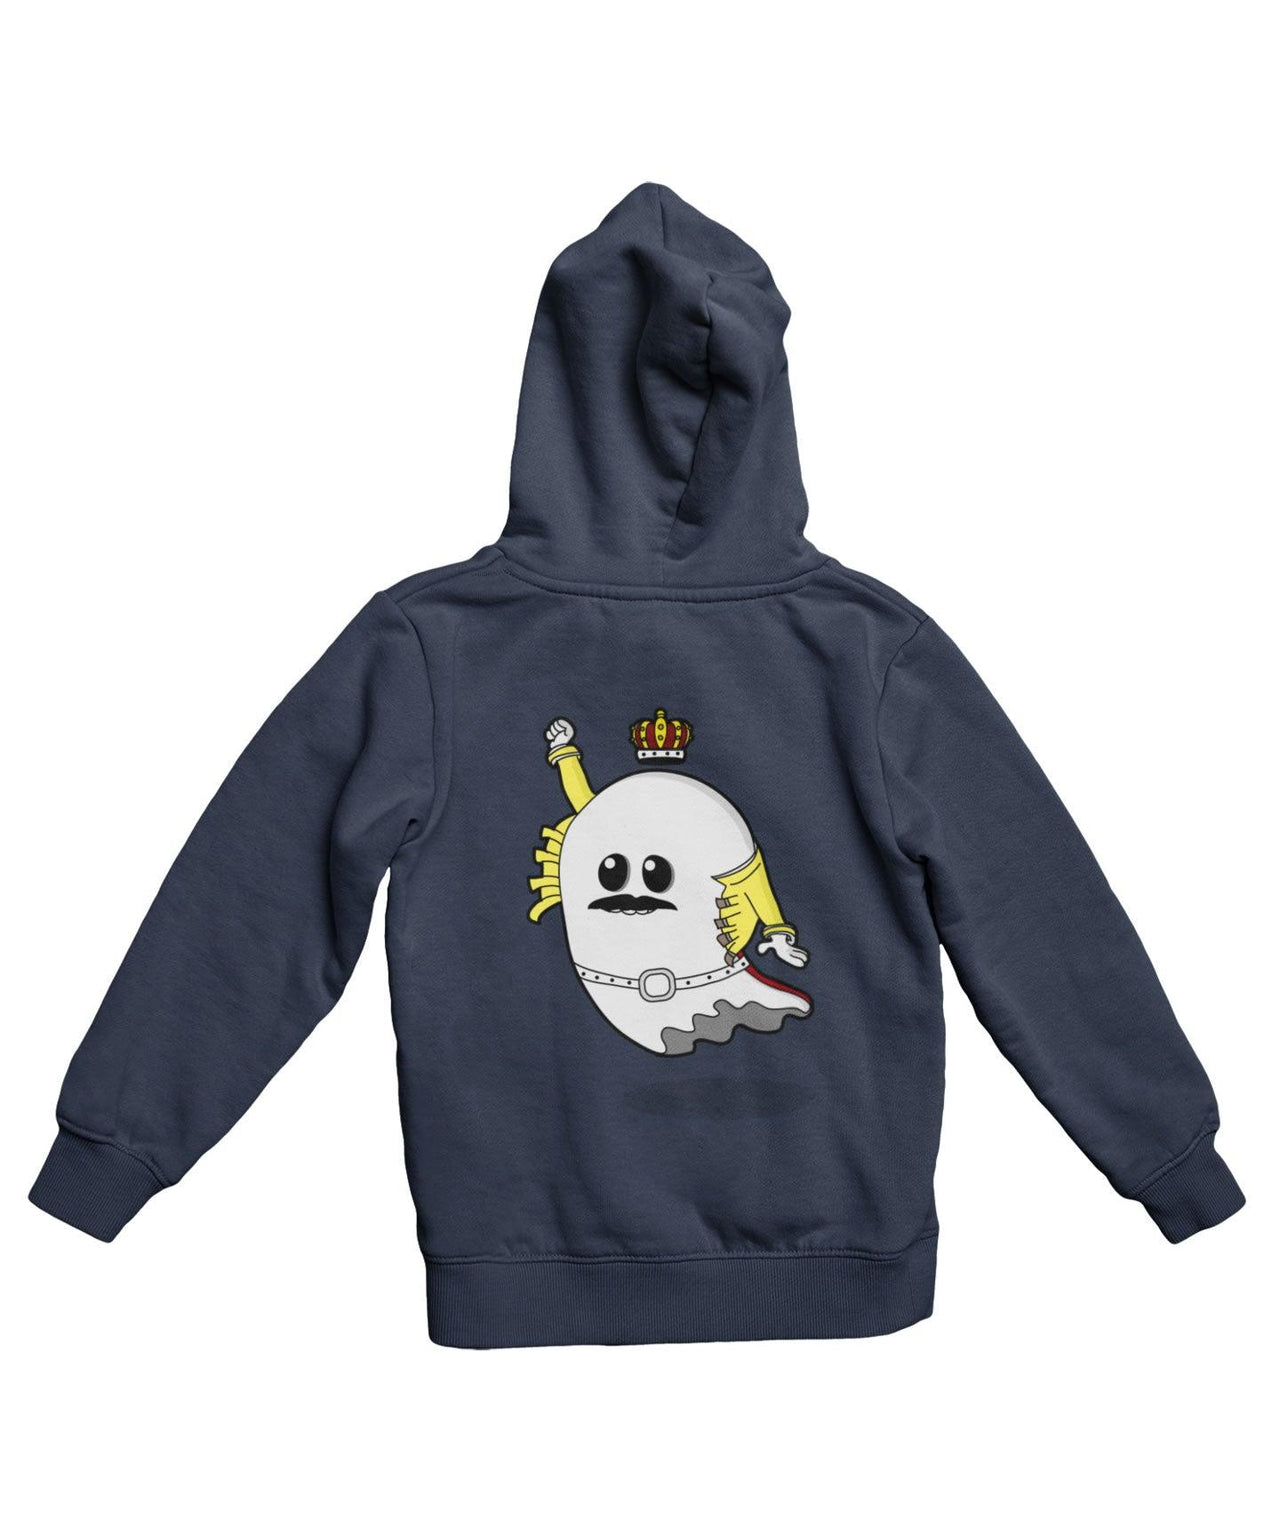 Top Notchy Deady Mercury Back Printed Hoodie For Men and Women 8Ball